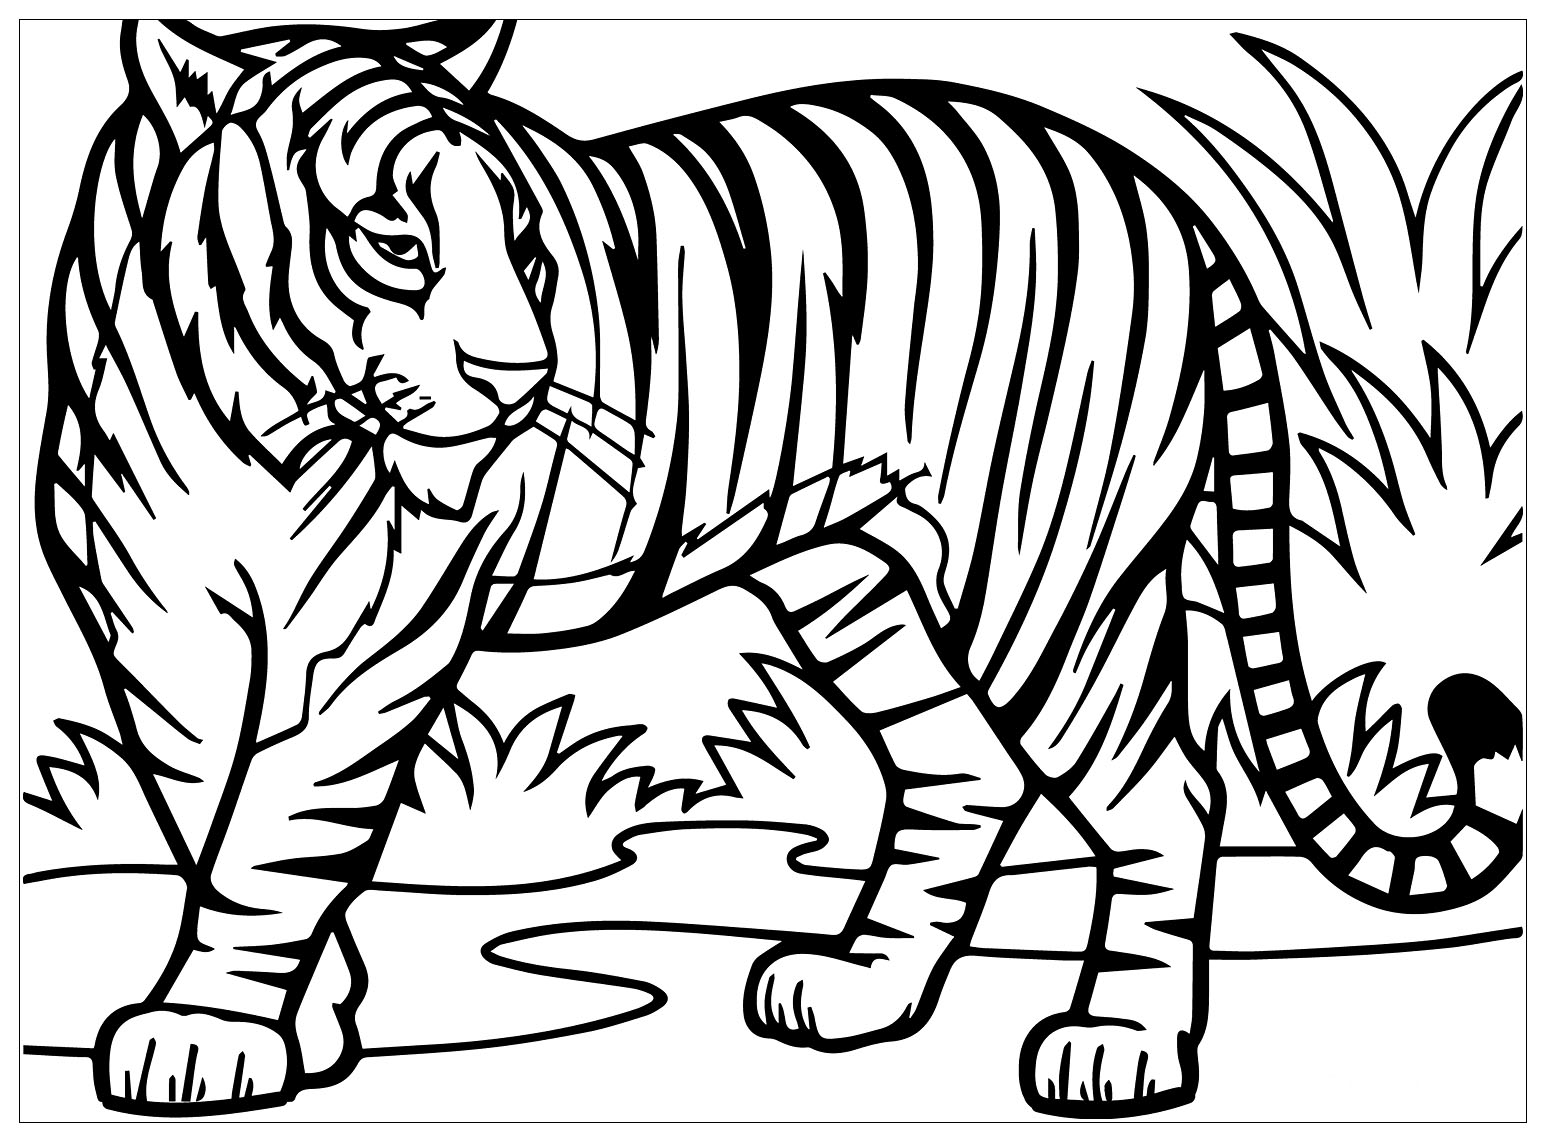 Download Tigers to color for kids - Tigers Kids Coloring Pages